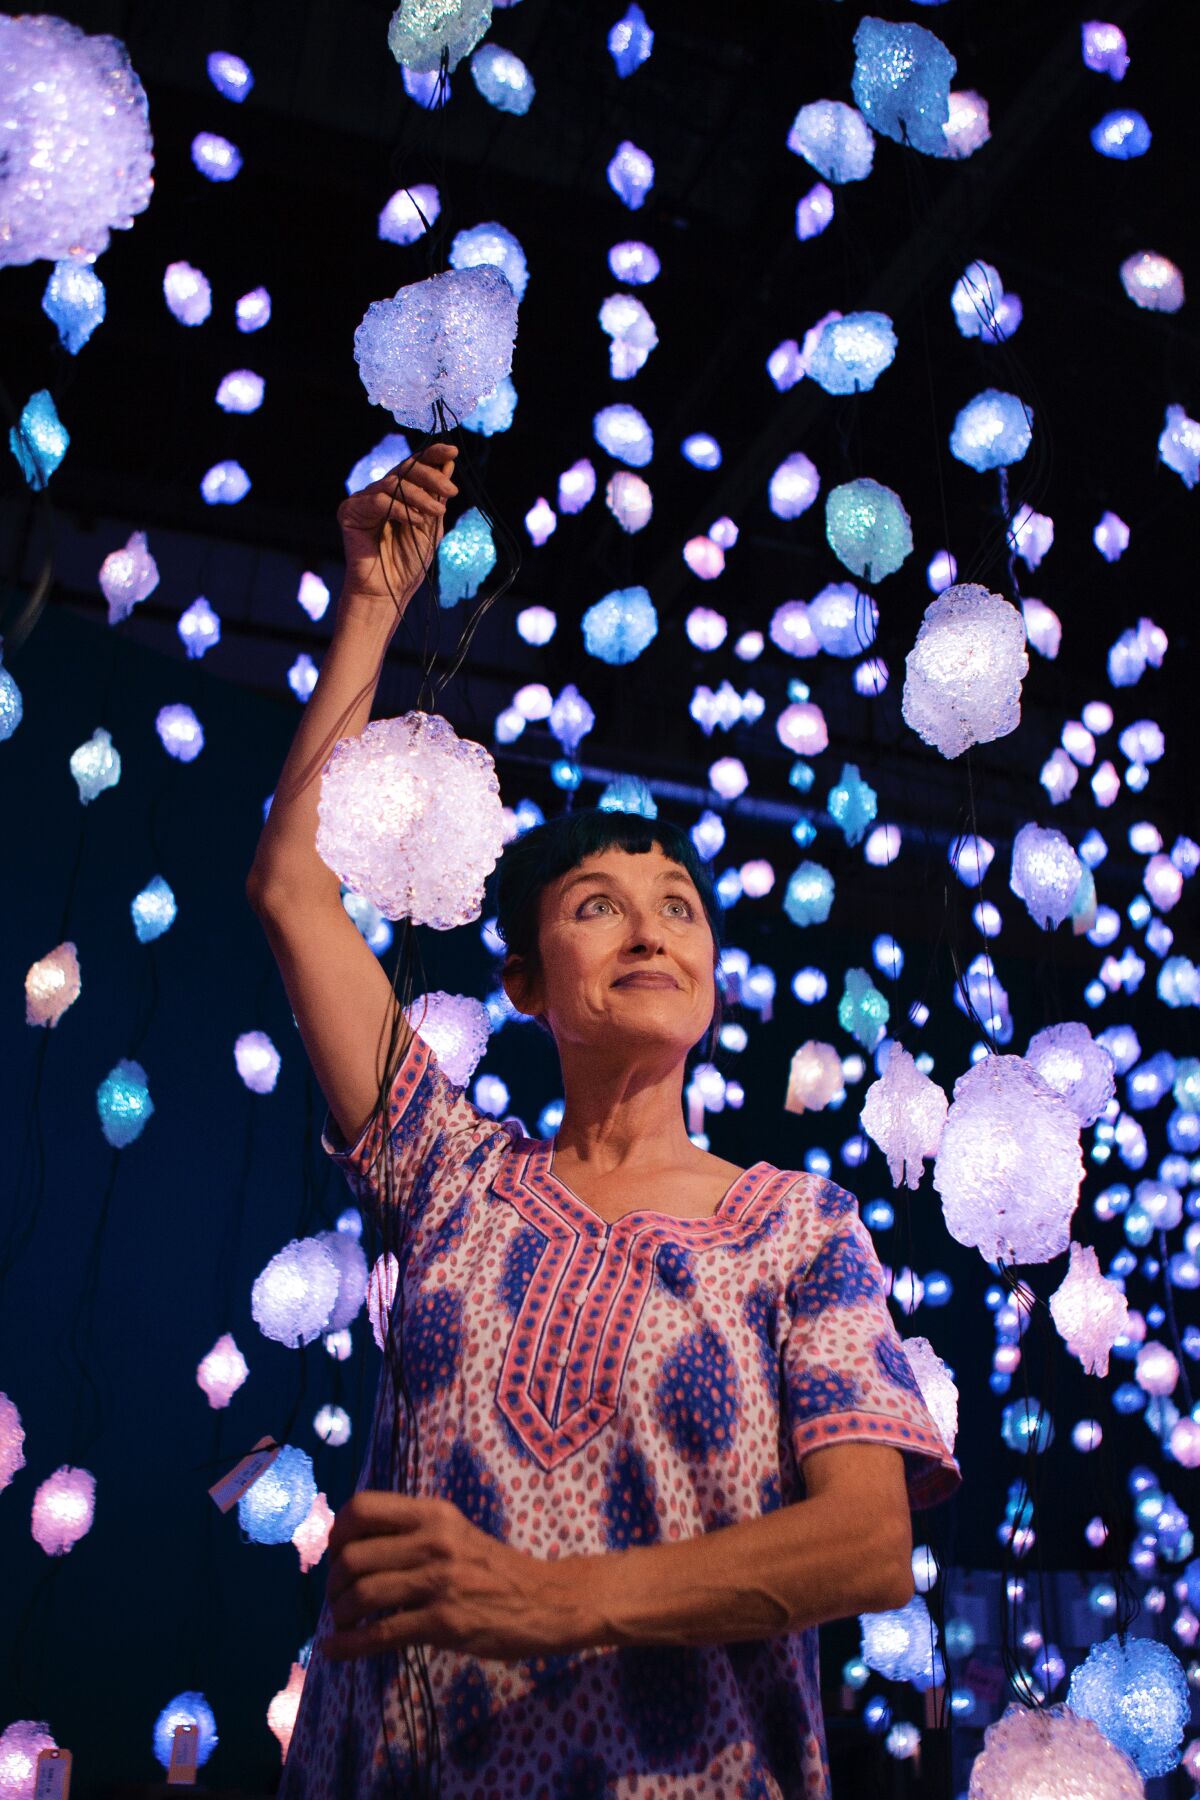 Swiss visual artist Pipilotti Rist inside one of her installations  at MOCA on Aug. 30, 2021, in Los Angeles